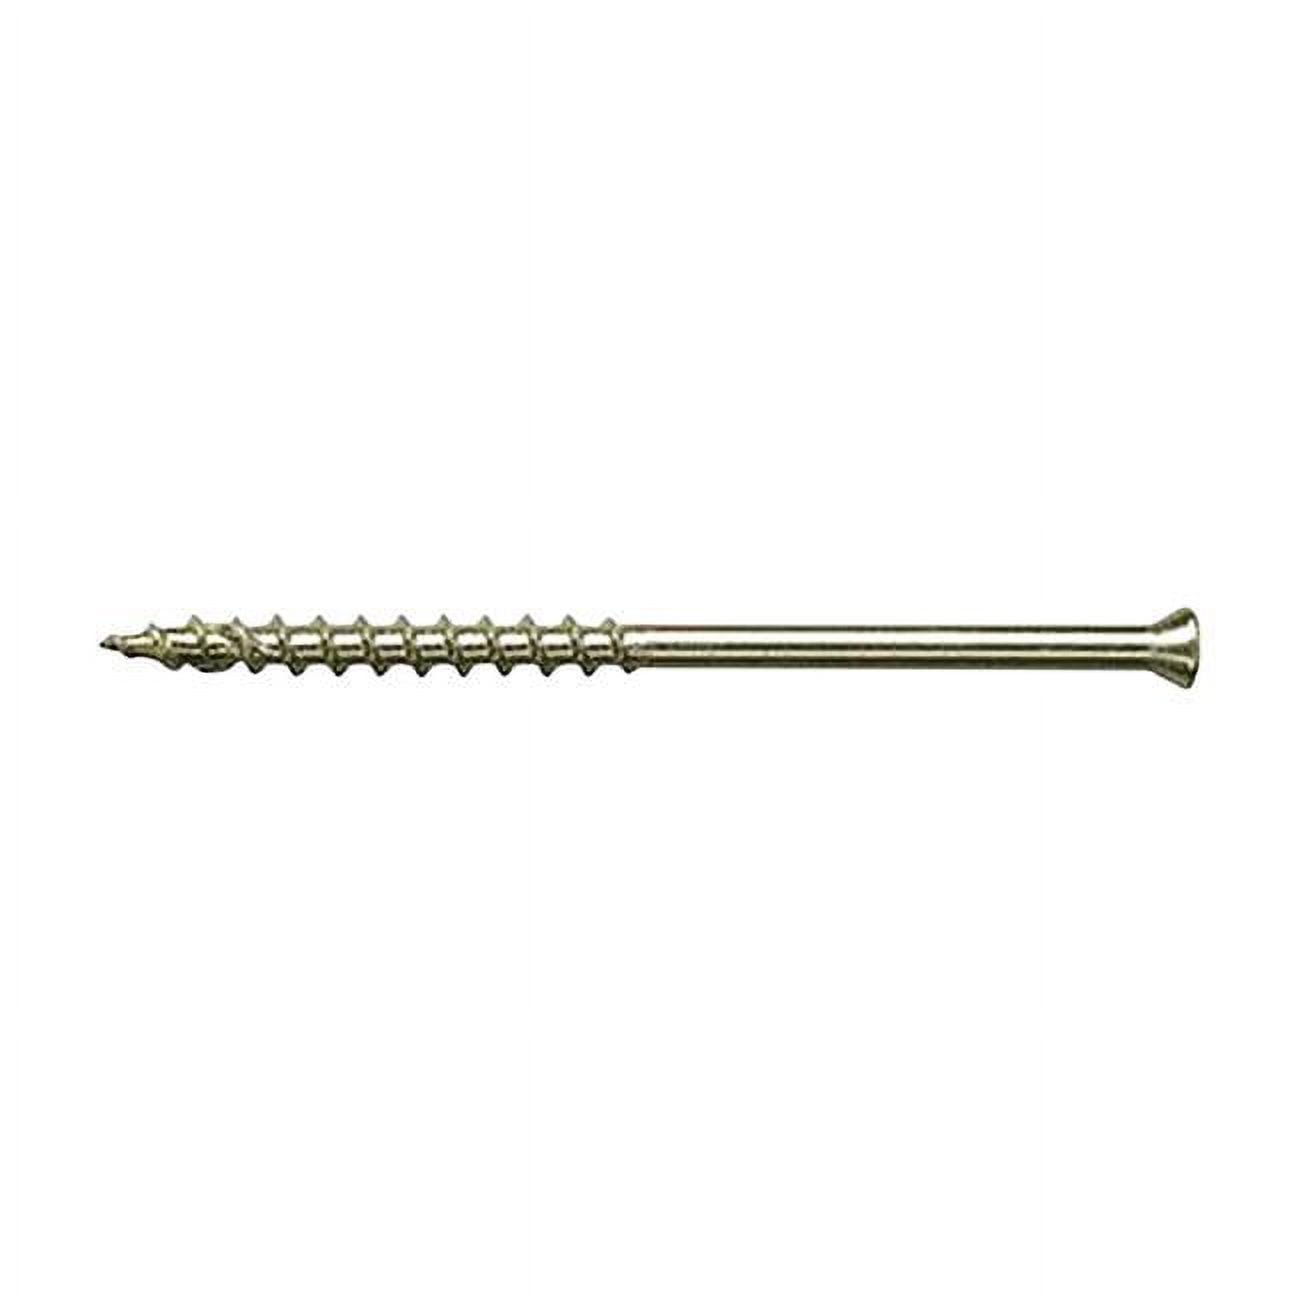 5007708 No. 7 X 1.62 In. Square Trim Head Stainless Steel Screws, 5 Lbs - Pack Of 6